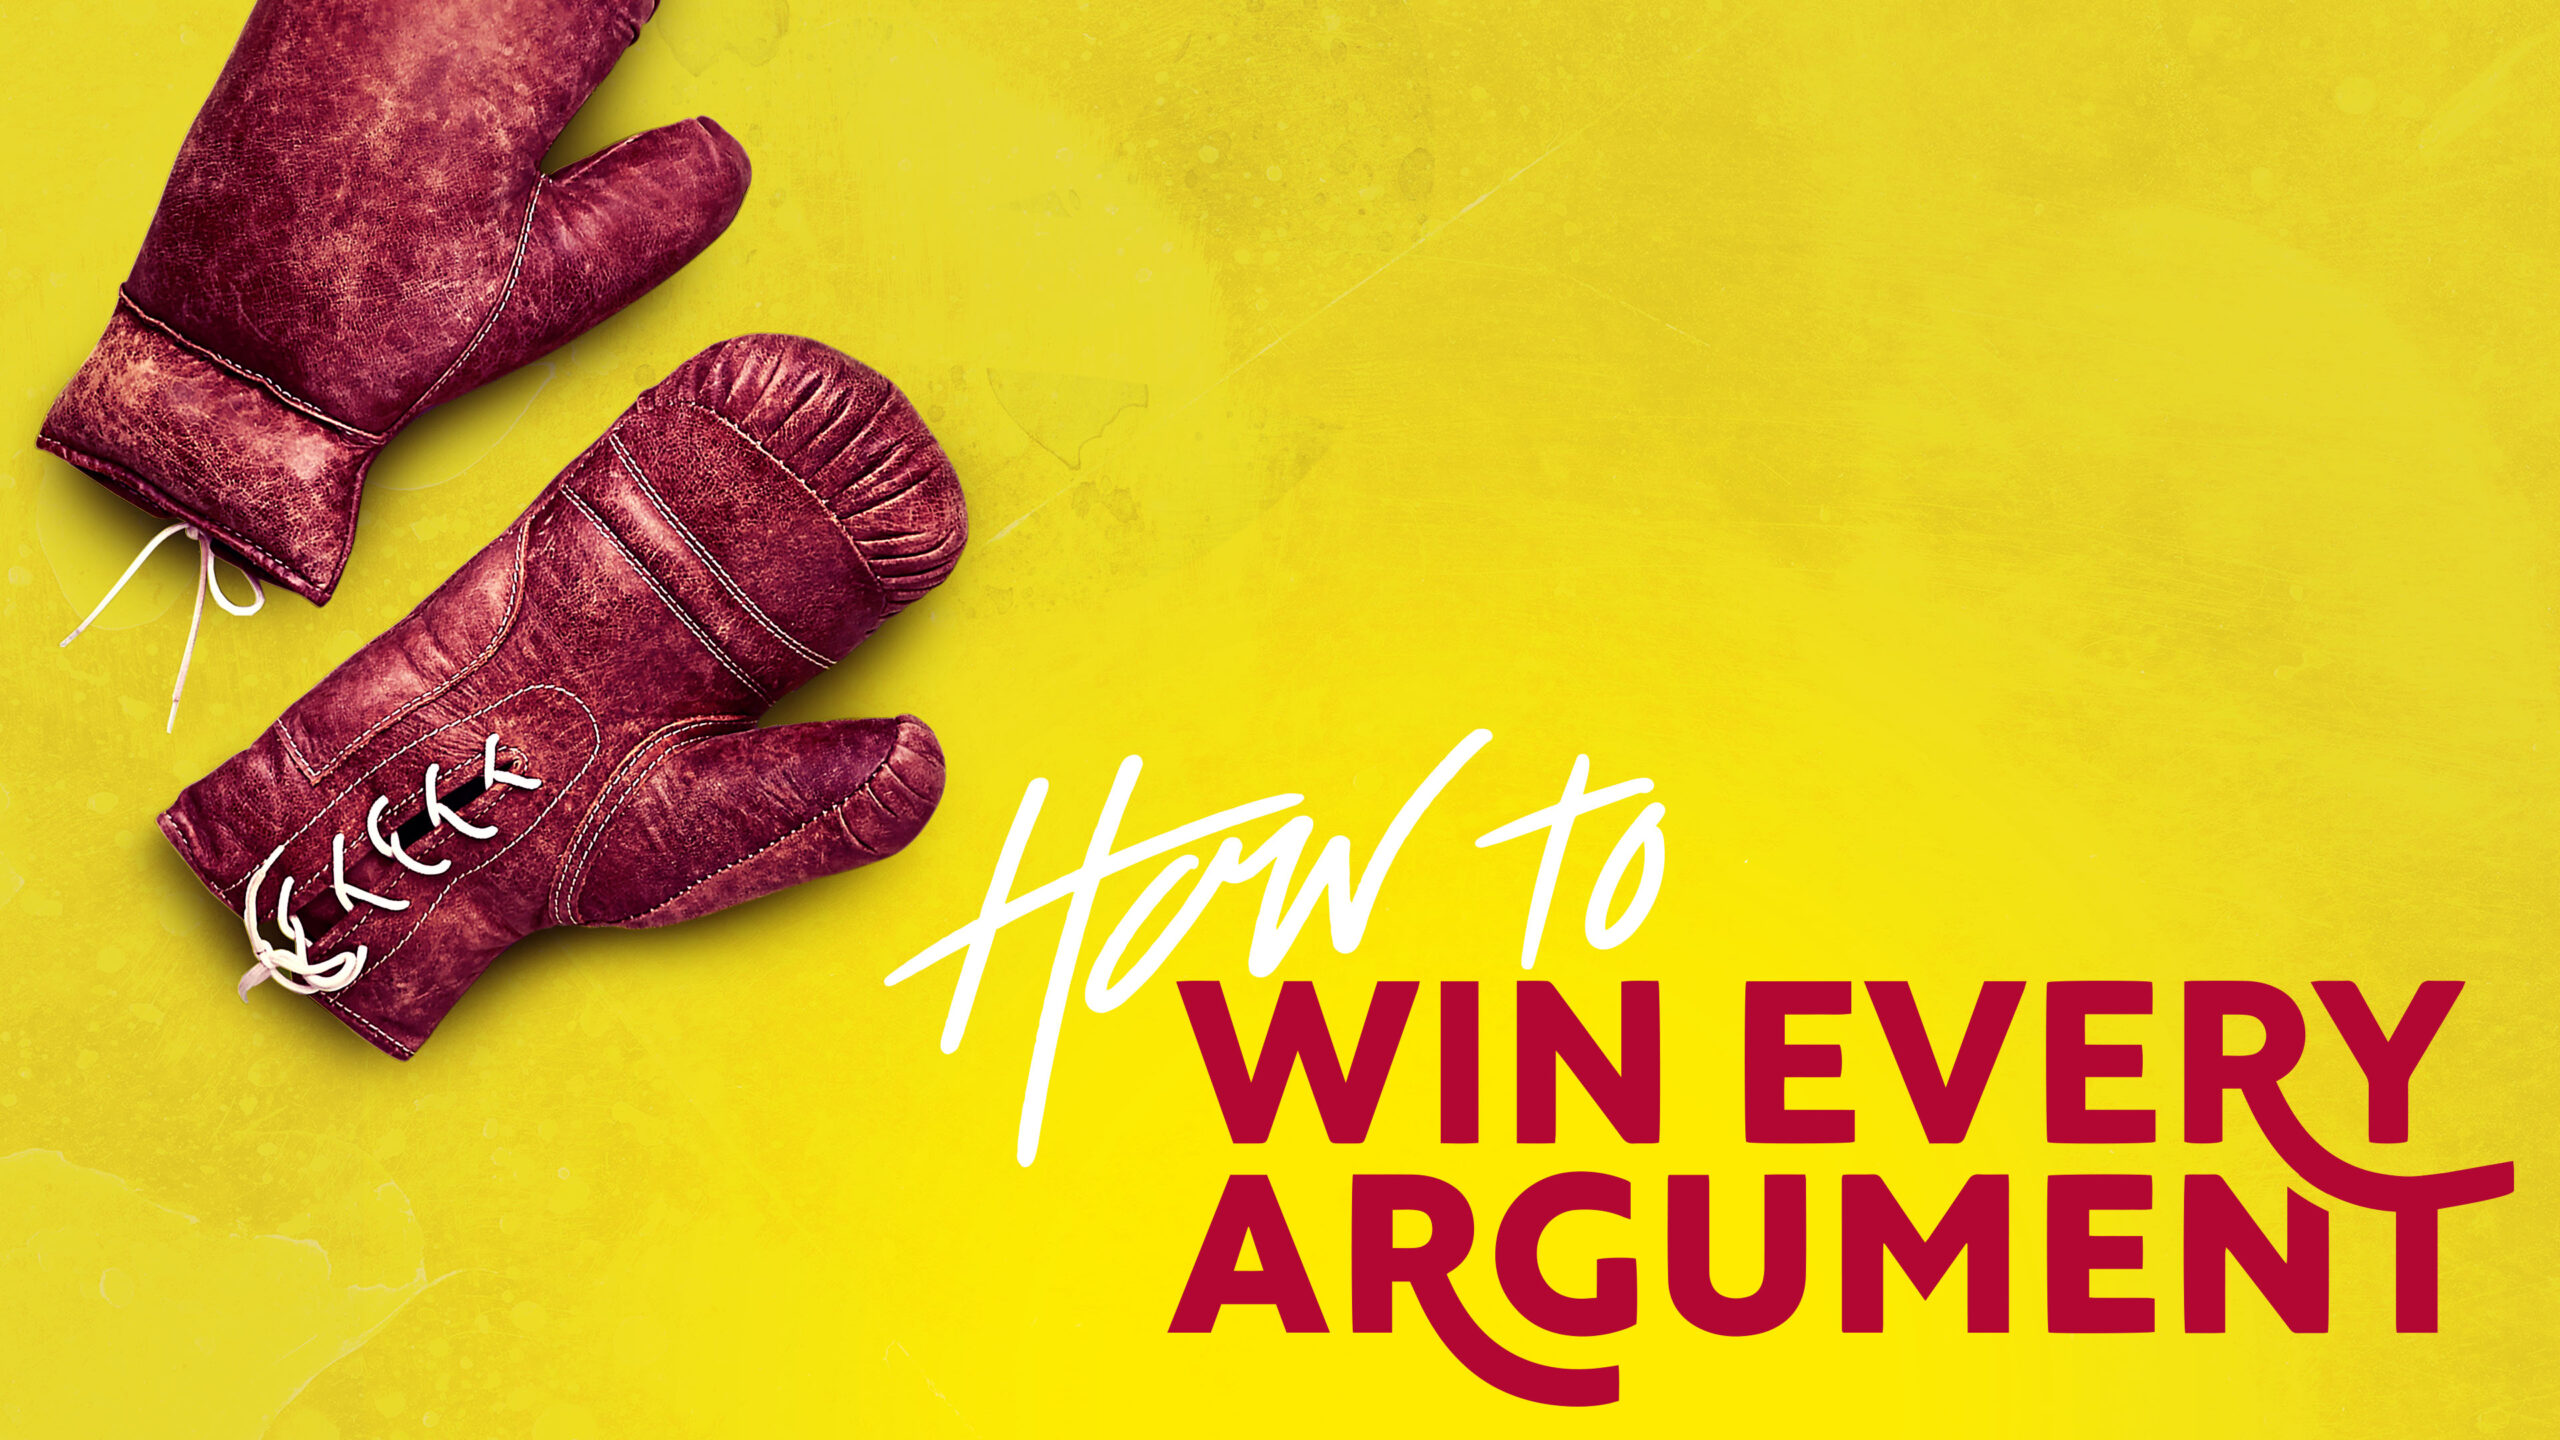 Sermon Series | How To Win Every Argument